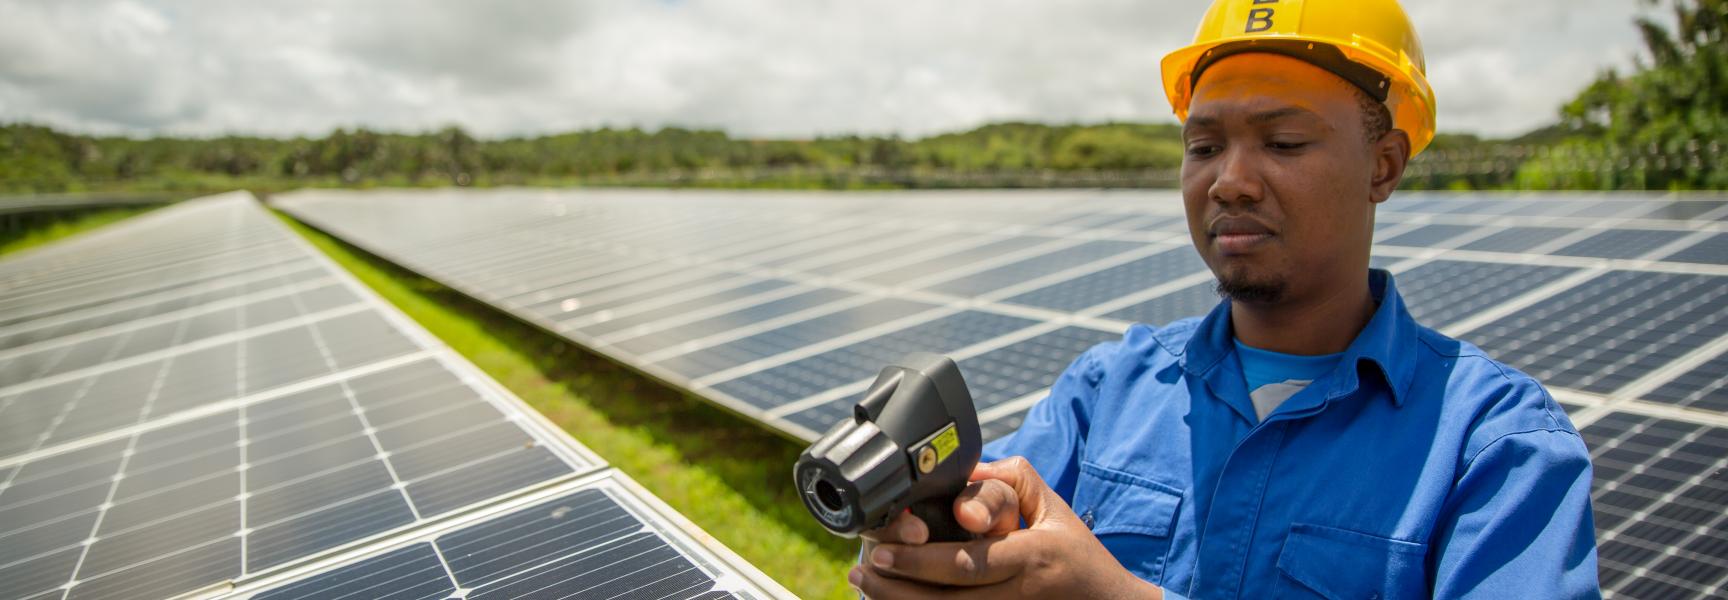 Fabien D_Albrede works as Photo Voltaic Technician at CEB Green Energy Company Limited, December 2019